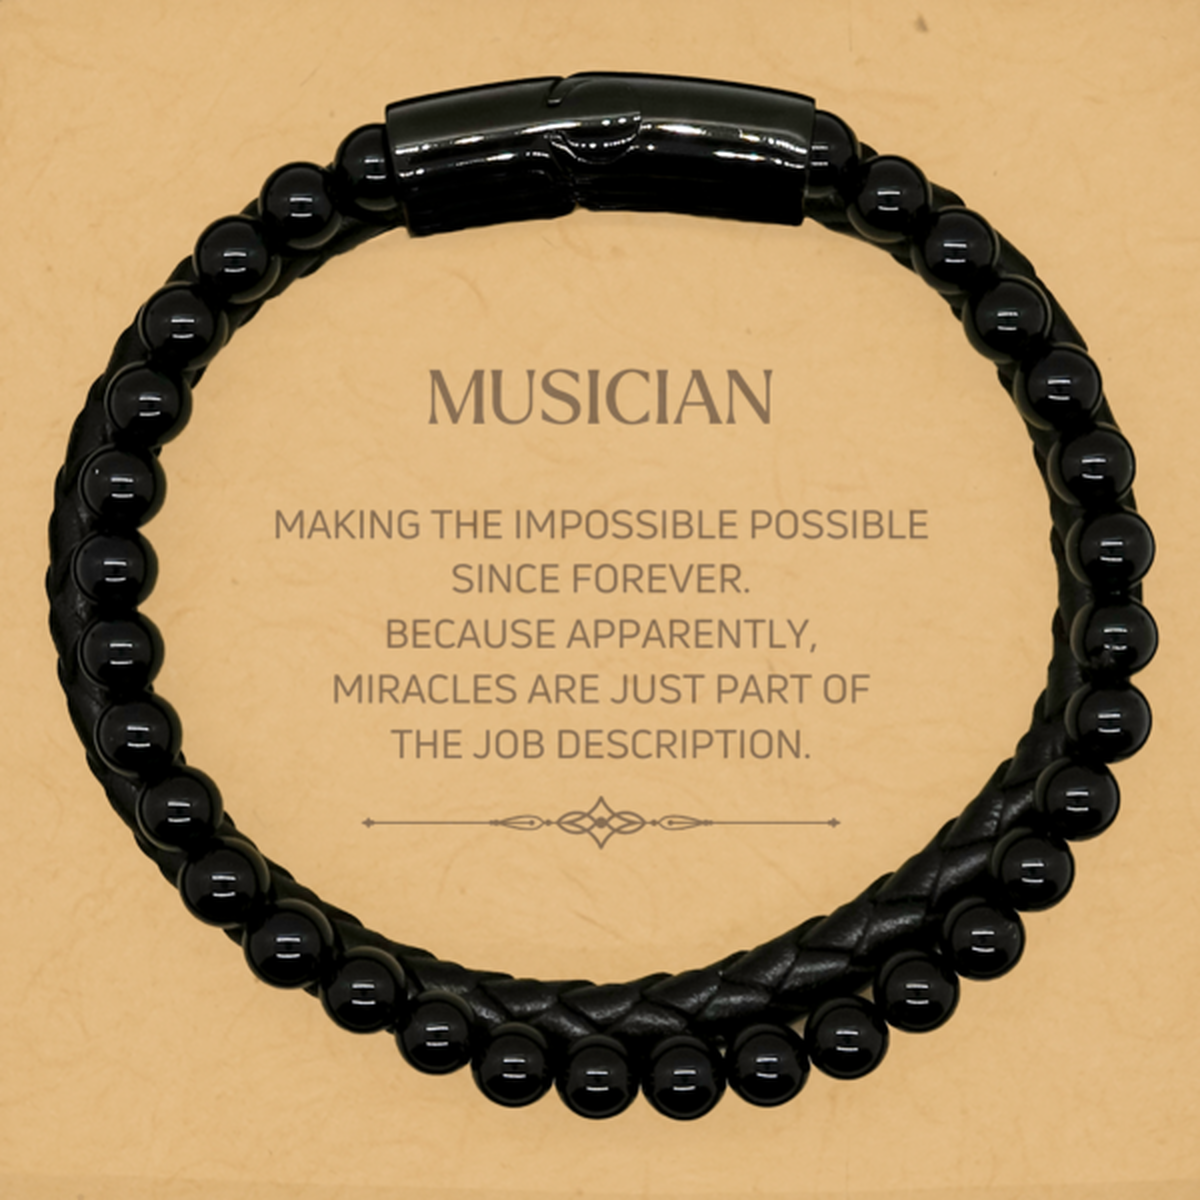 Funny Musician Gifts, Miracles are just part of the job description, Inspirational Birthday Stone Leather Bracelets For Musician, Men, Women, Coworkers, Friends, Boss